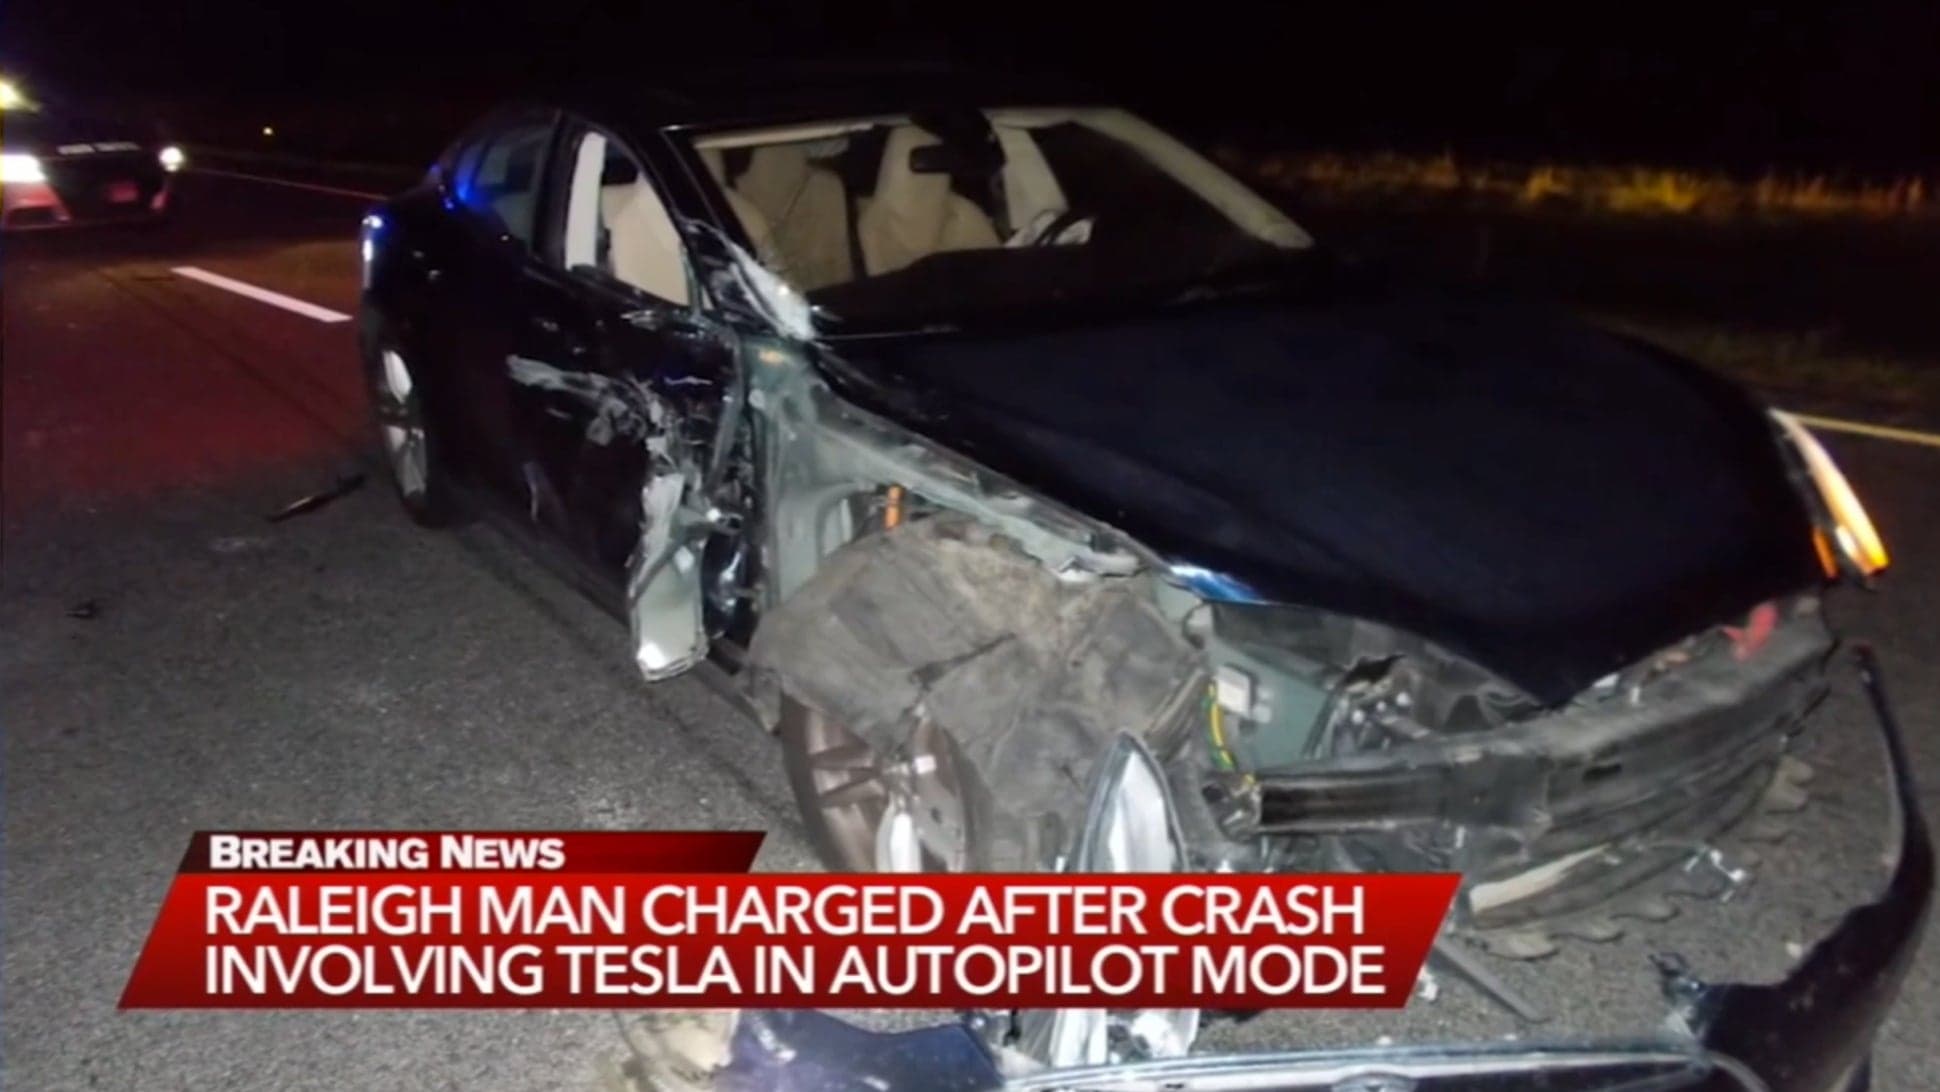 Tesla Driver Watching Movie on Autopilot Crashes Into Cop Cars: Police